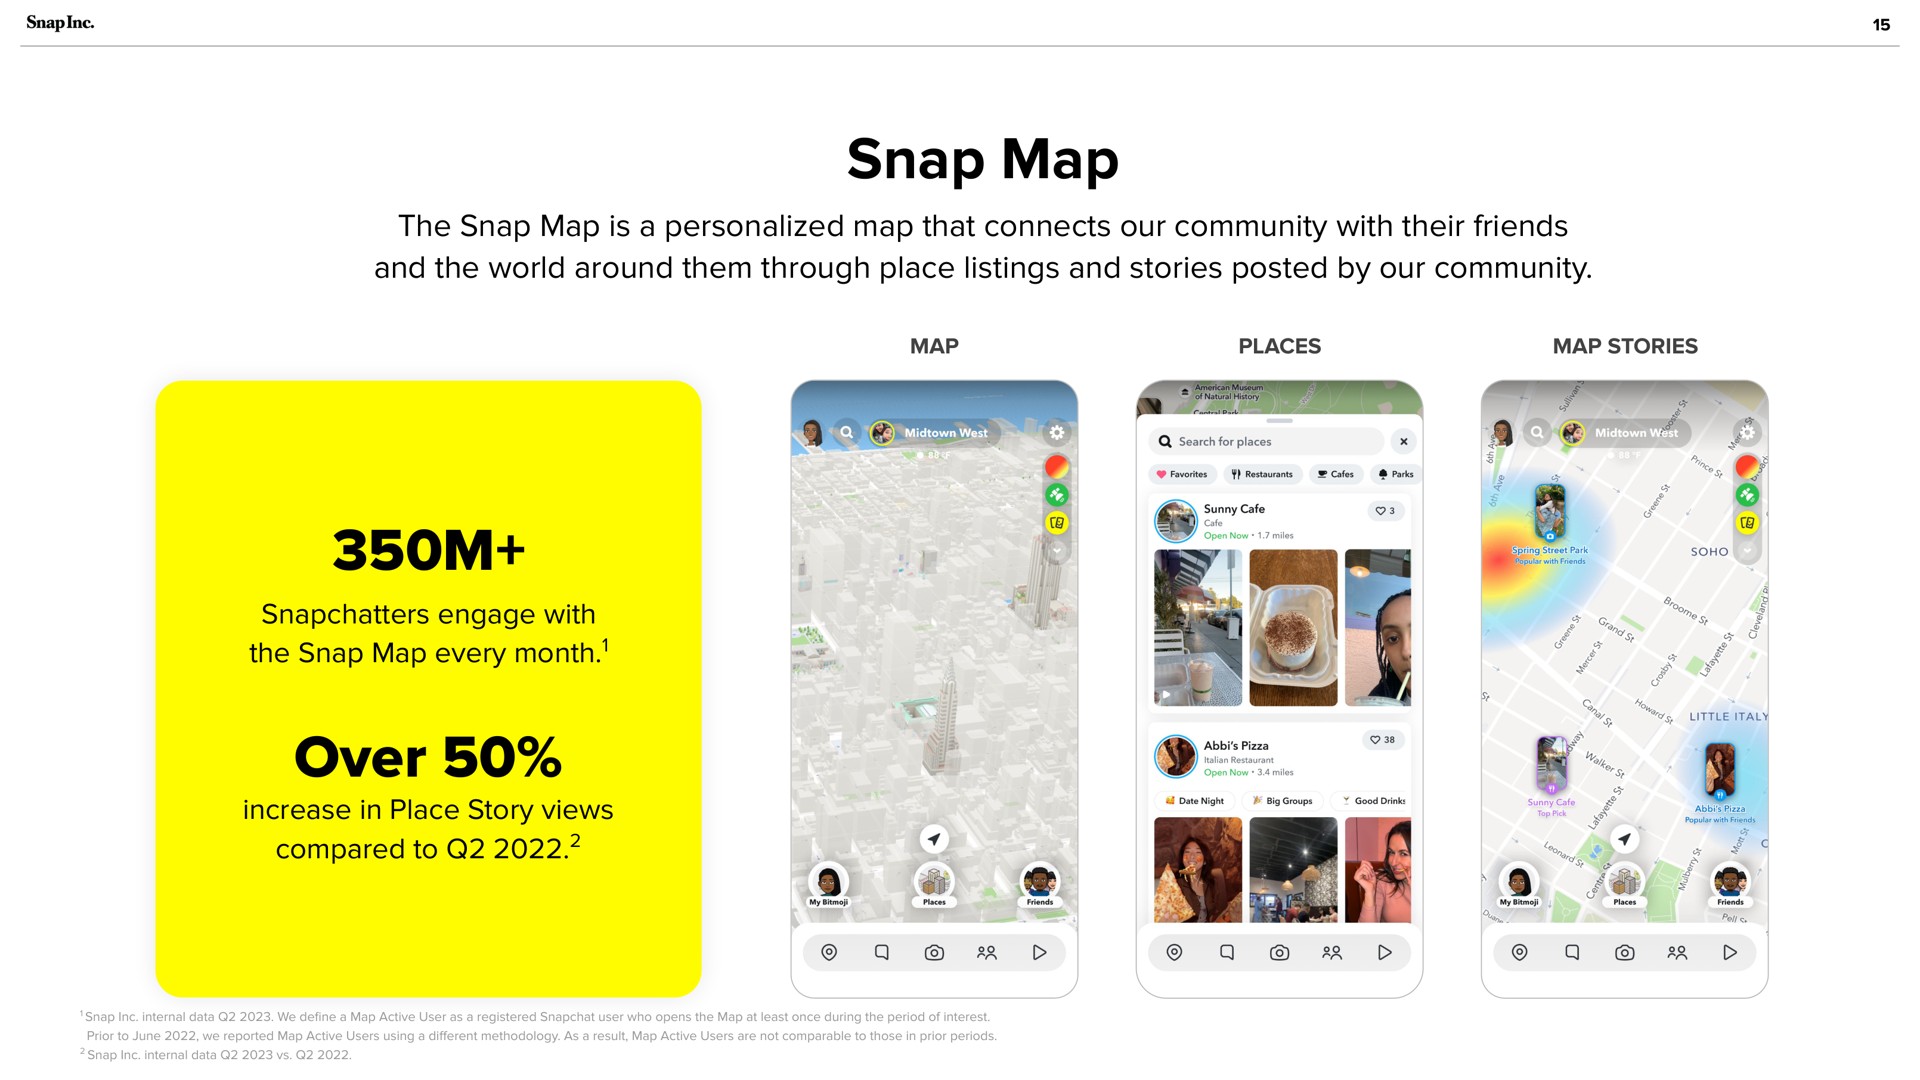 snap map over compared to a by a | Snap Inc